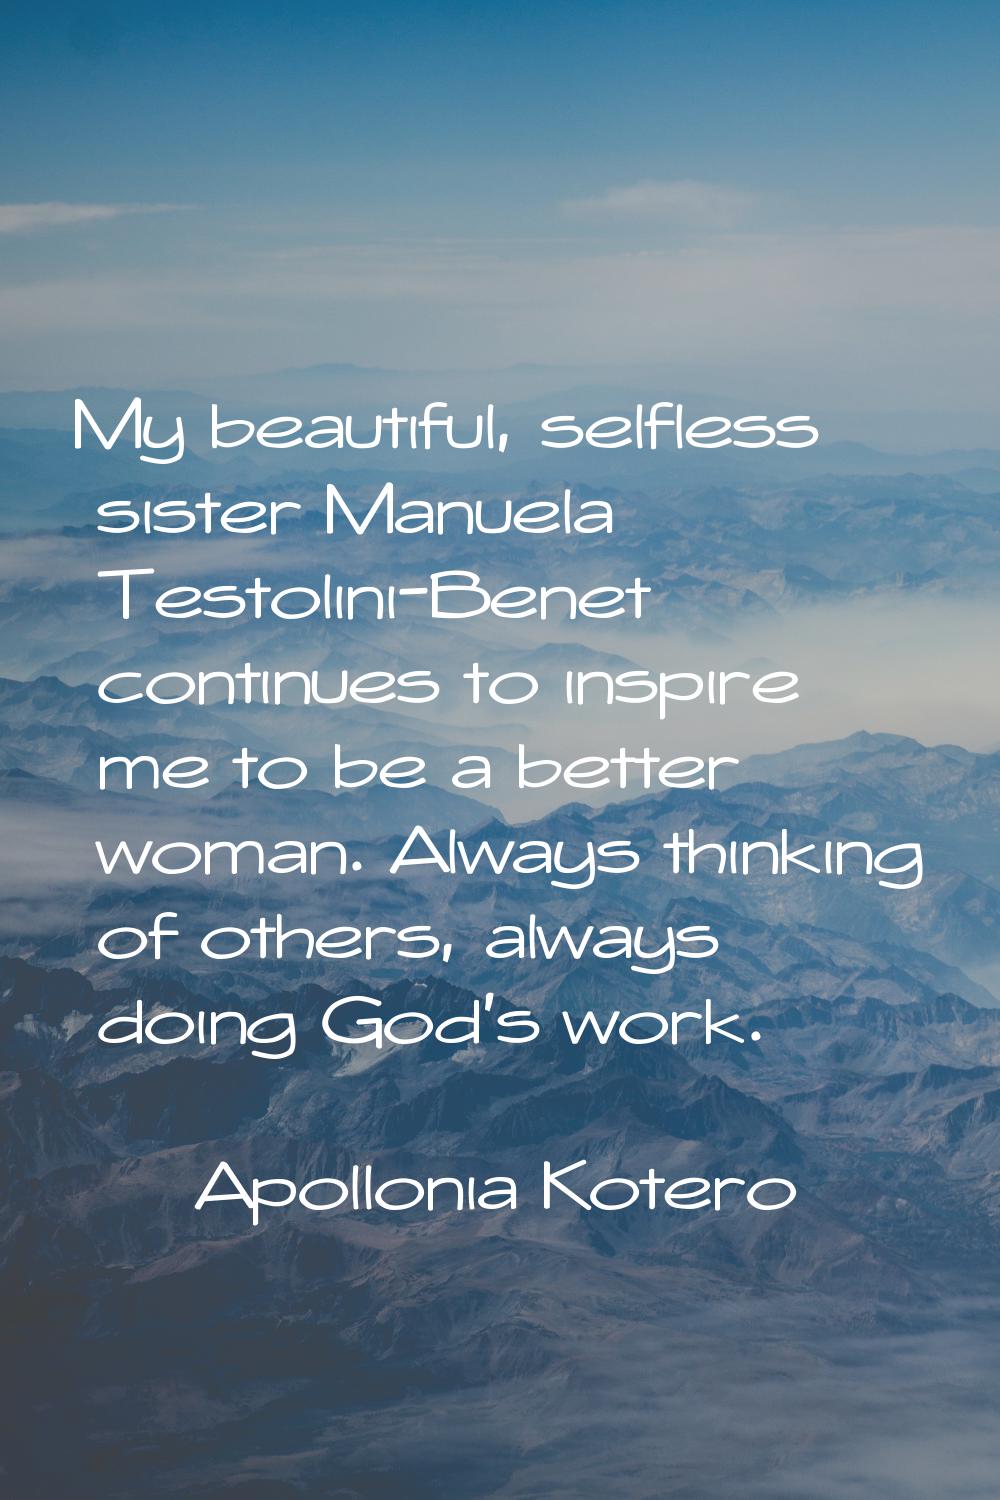 My beautiful, selfless sister Manuela Testolini-Benet continues to inspire me to be a better woman.